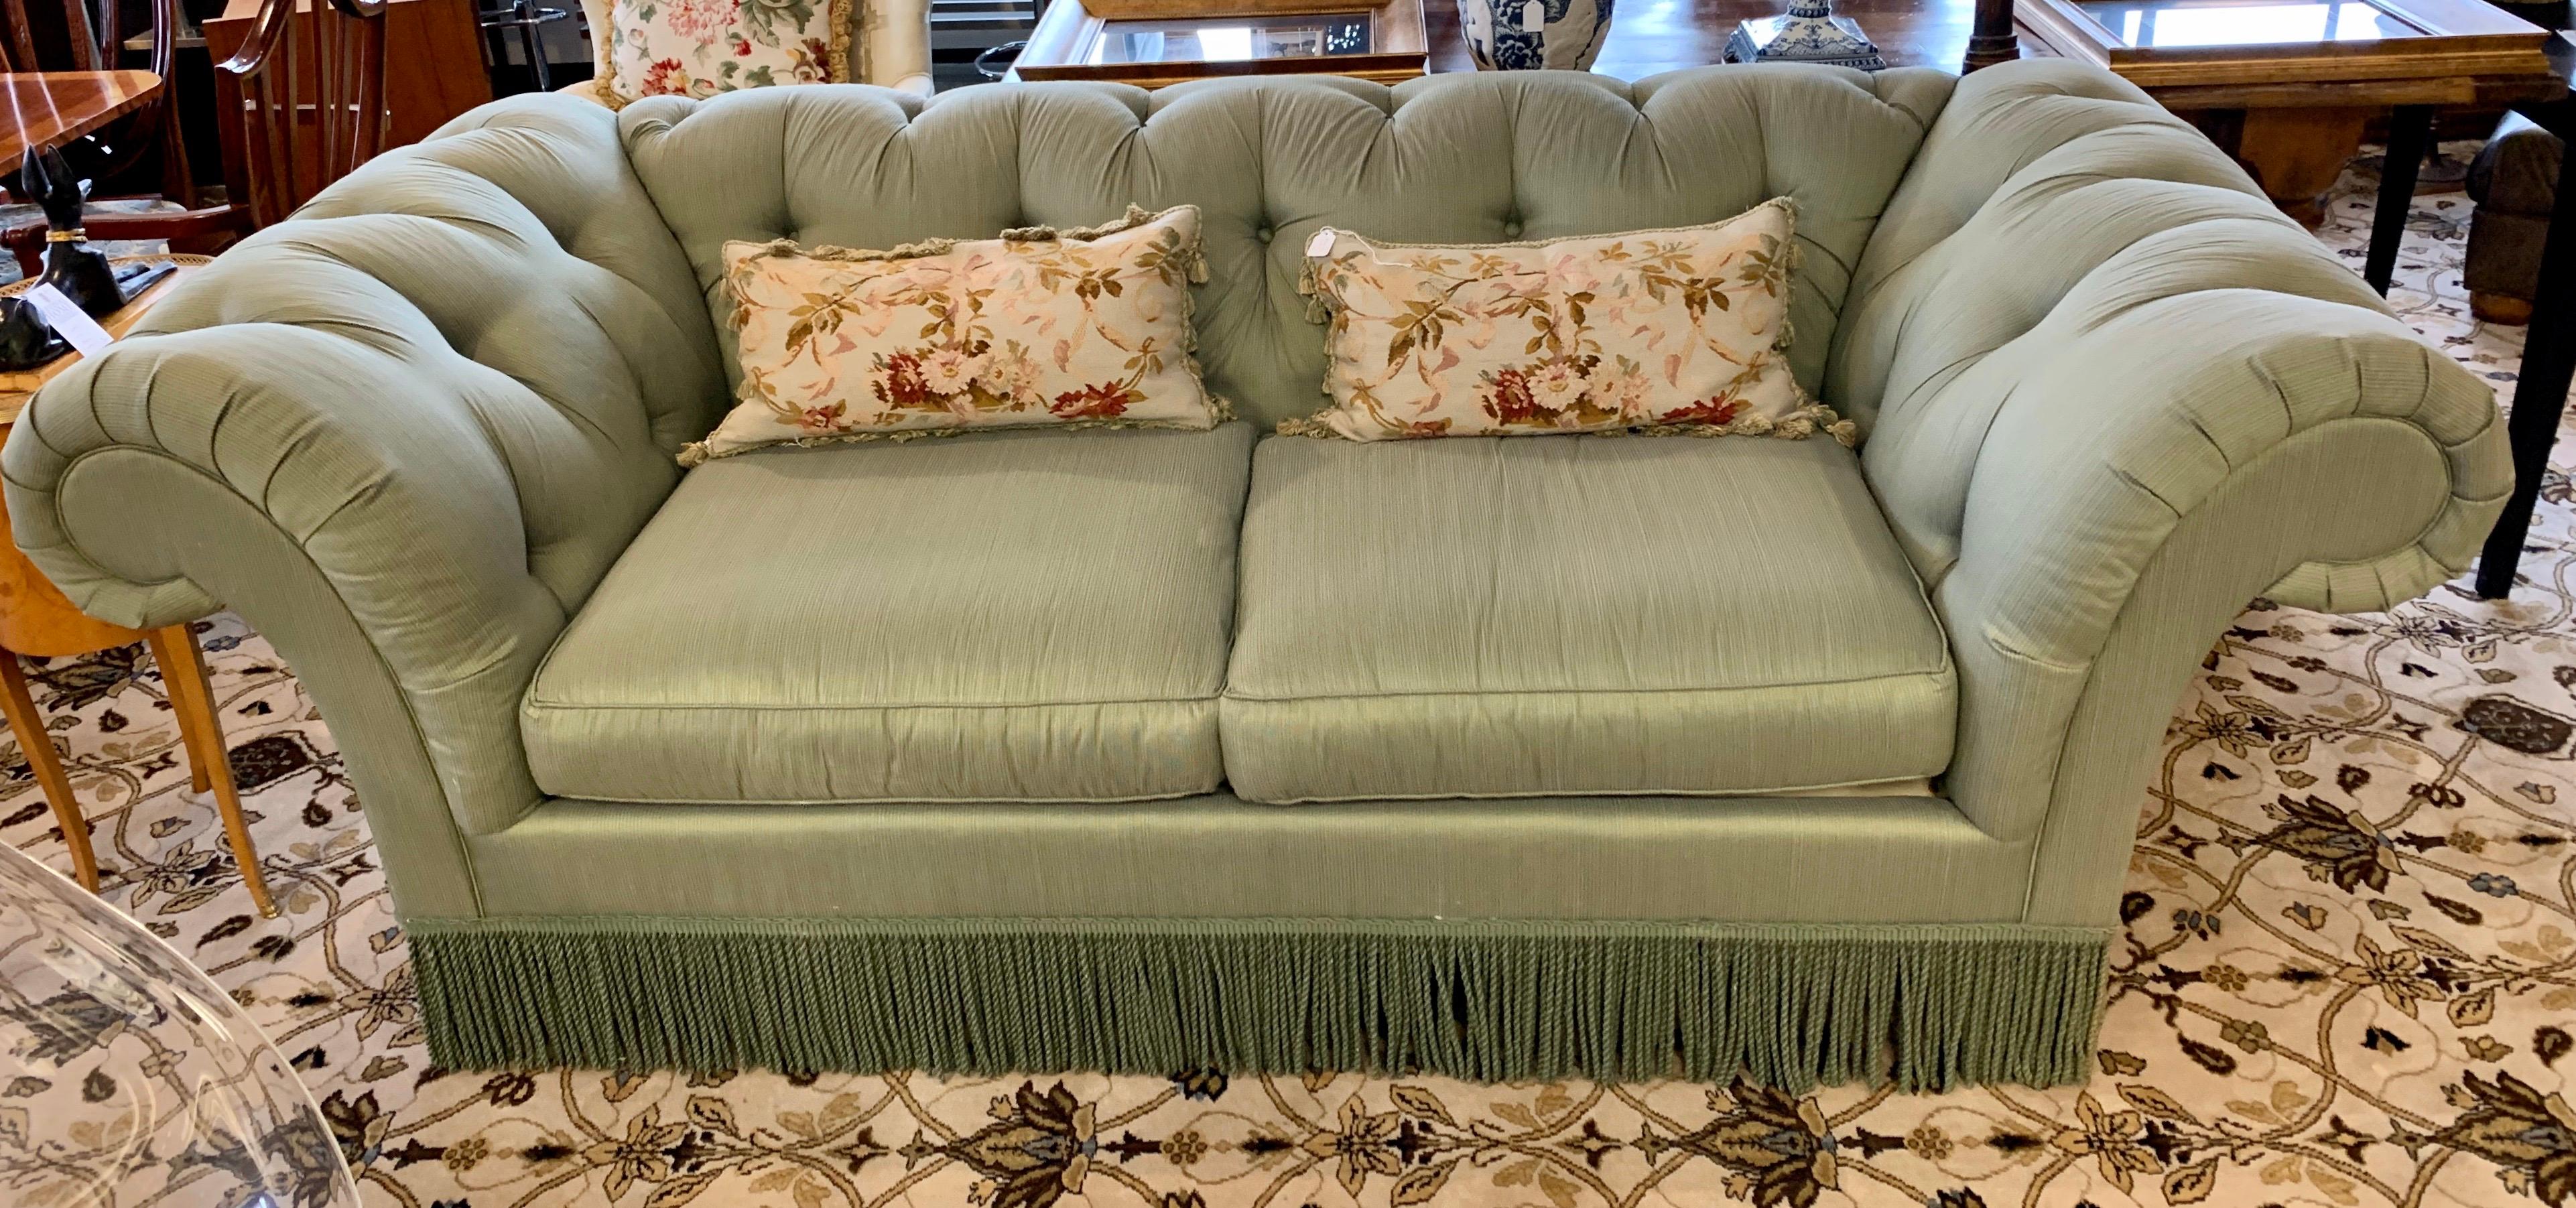 Elegant custom pale olive green chesterfield sofa with generous rolled arms. Seating for up to three people.  The fabric is stunning and is a cotton blend with a subtle pin stripe. Features coordinating buillion fringe and eight way hand tied